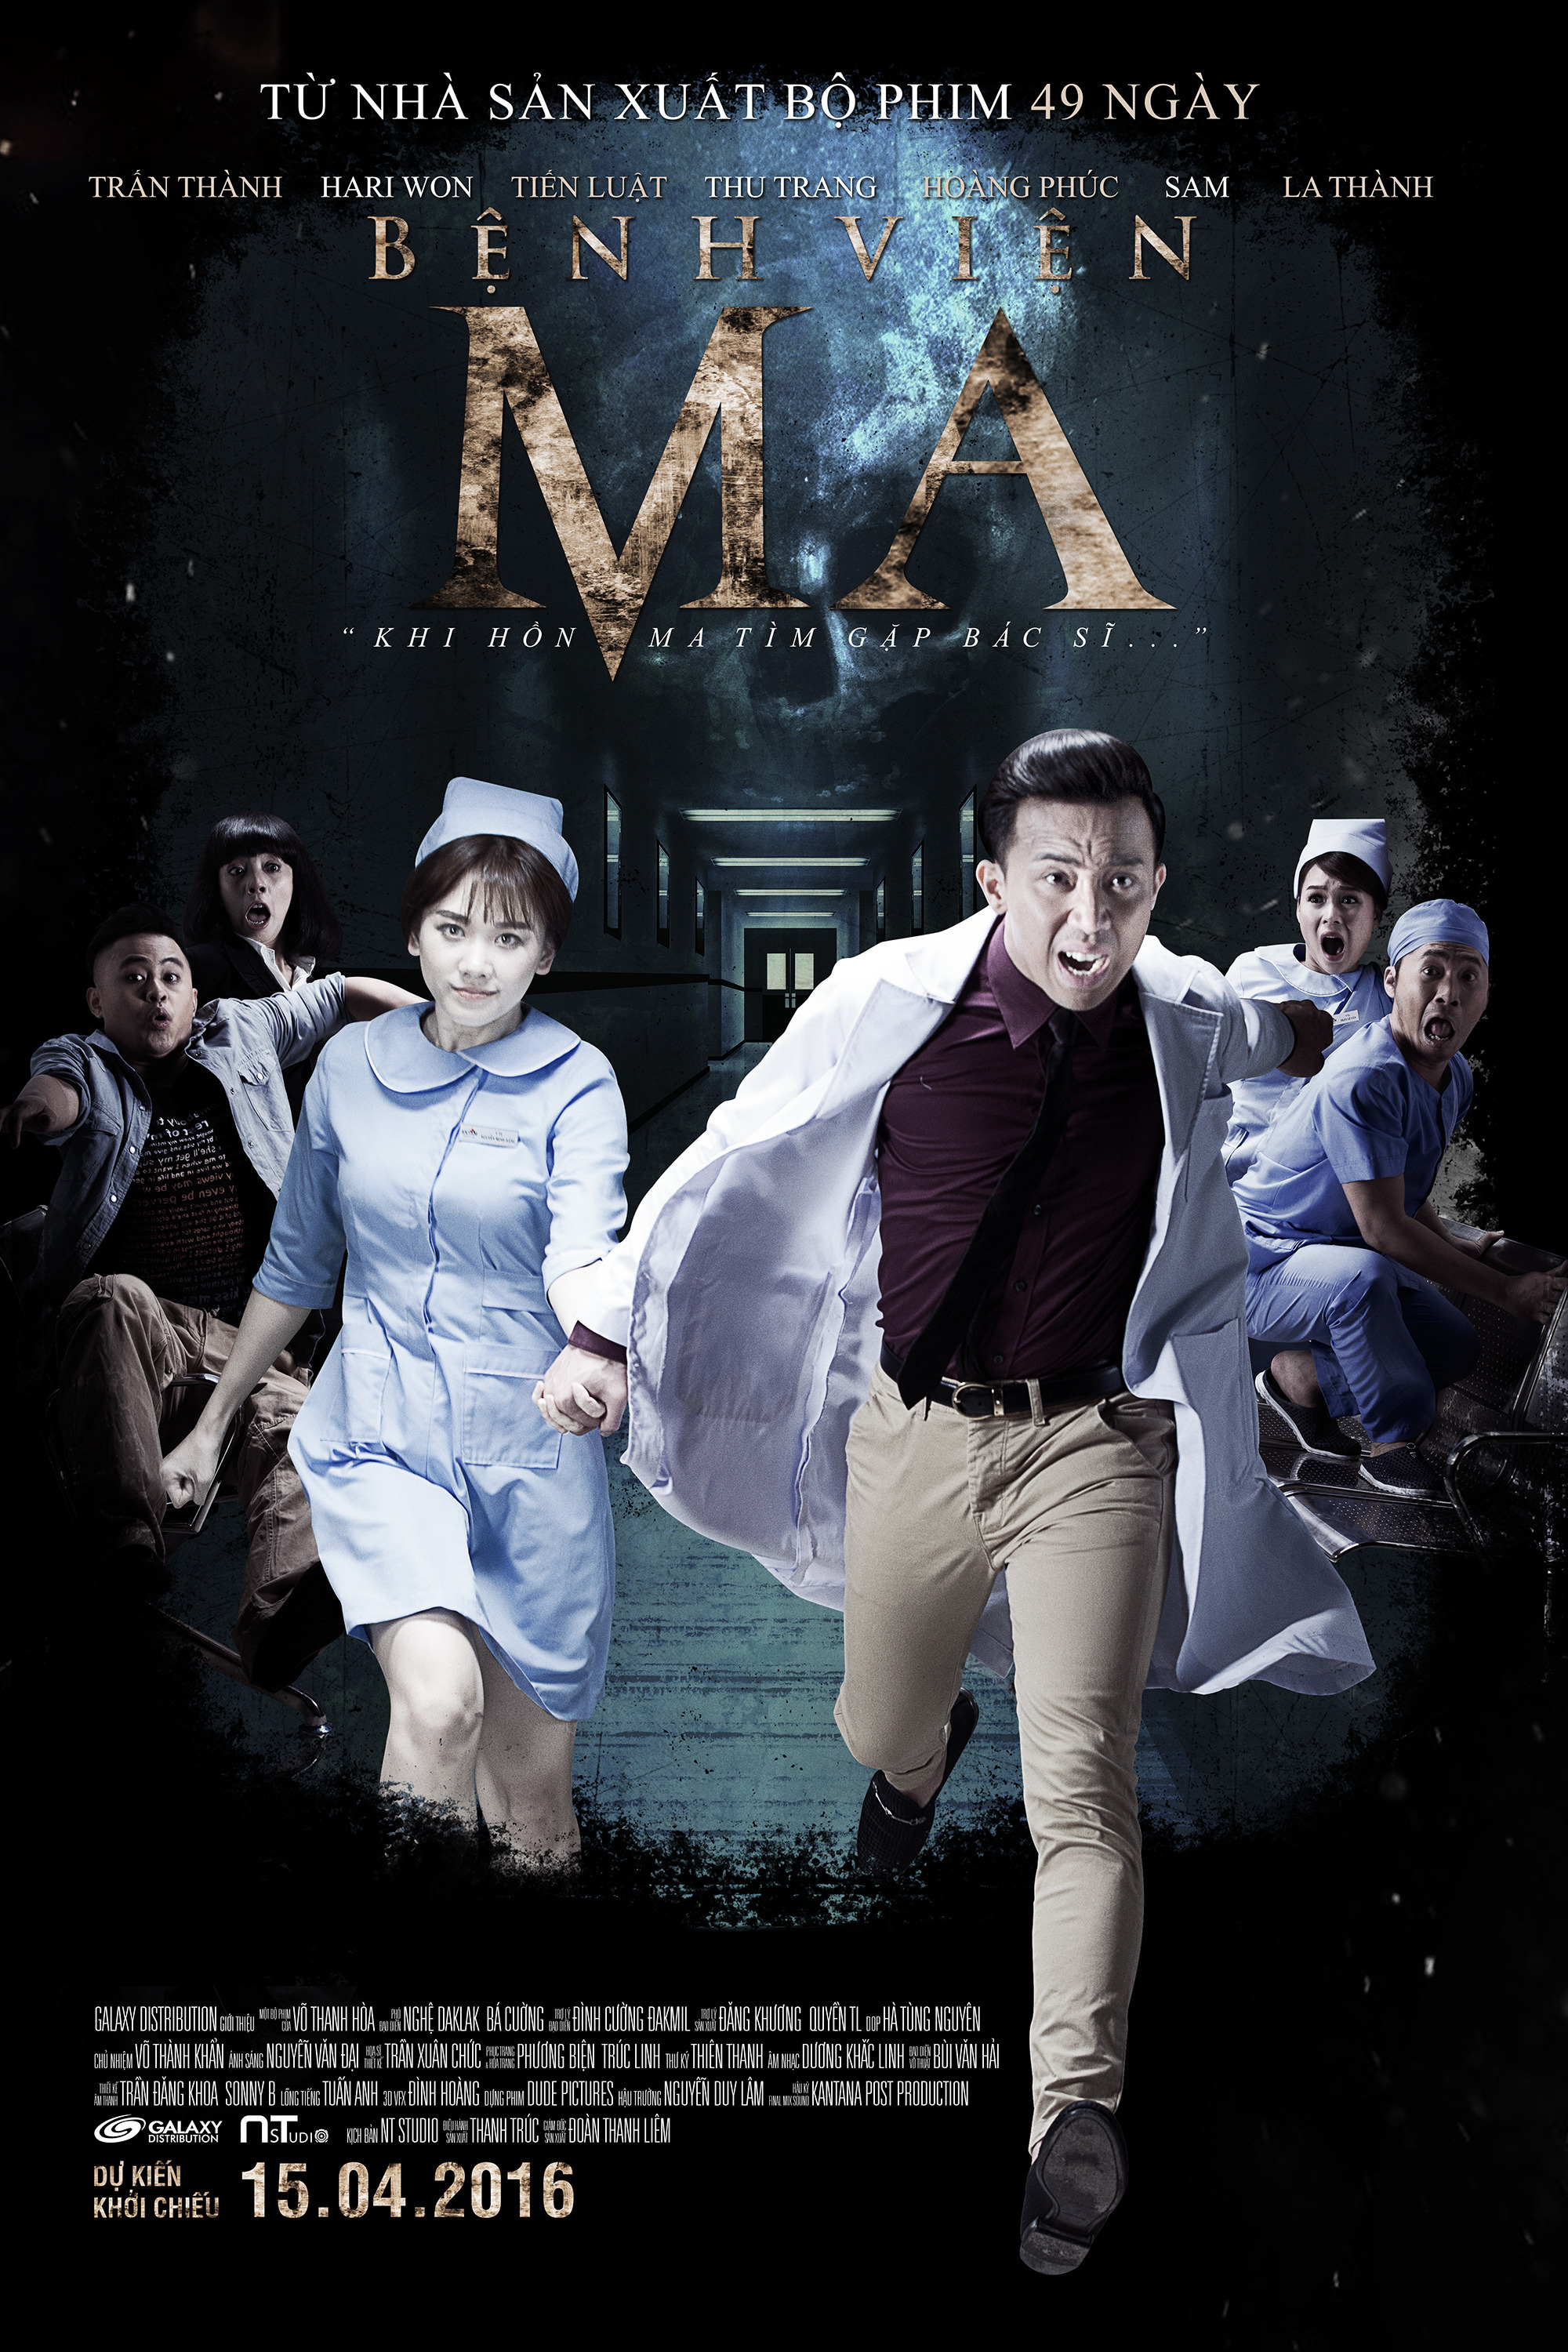 Mega Sized Movie Poster Image for Benh vien ma 